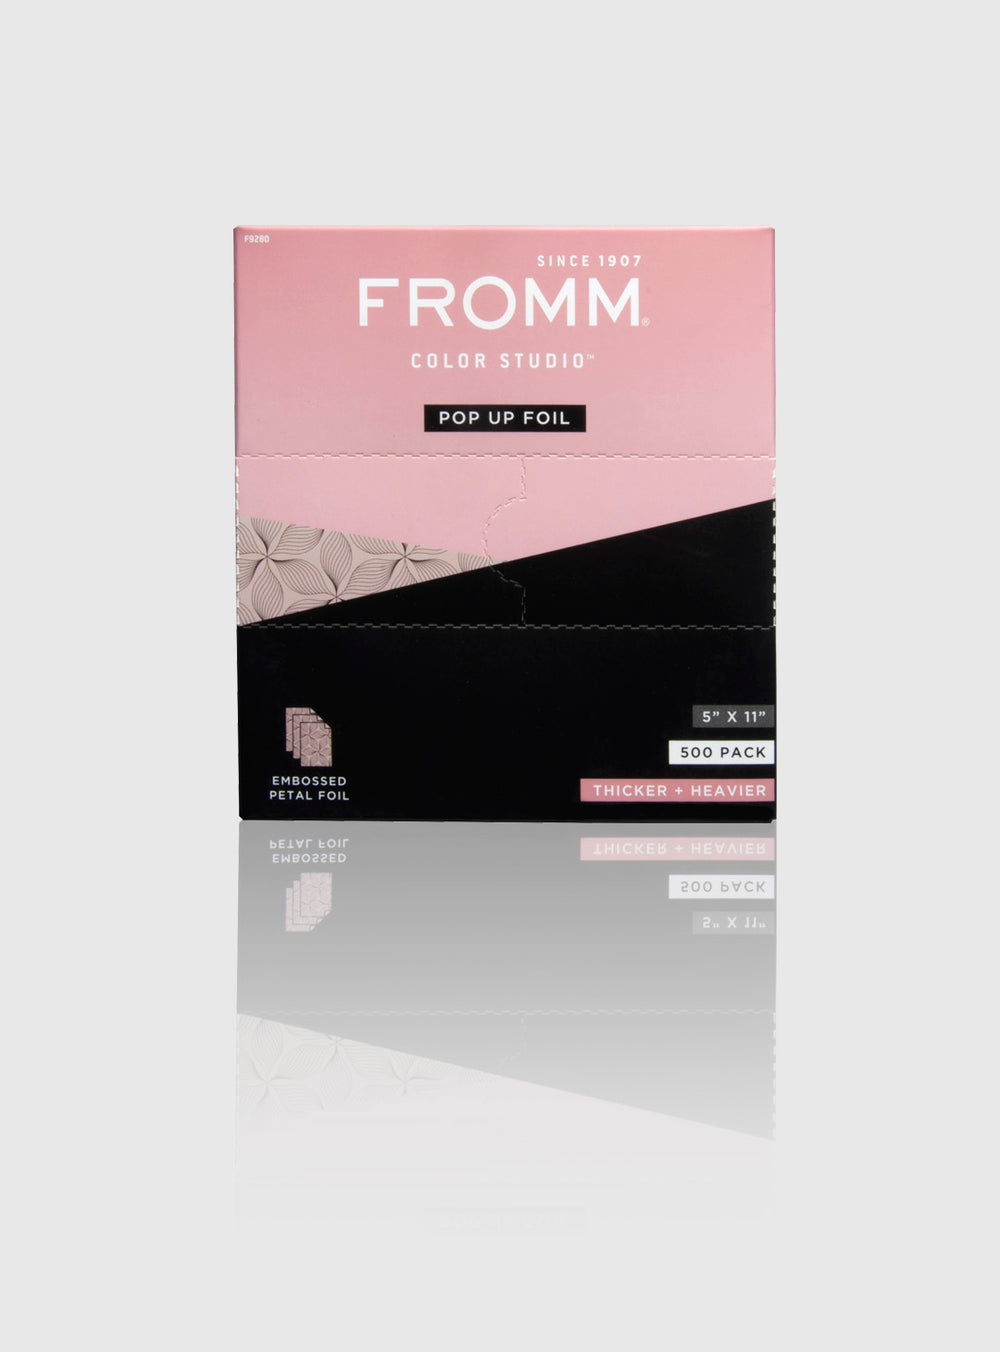 Fromm Color Studio Medium Weight Pop Up Hair Foil in Pink Petals Pattern,  5 x 11 Embossed Aluminum Foil Sheets, Hair Foils for Highlighting and